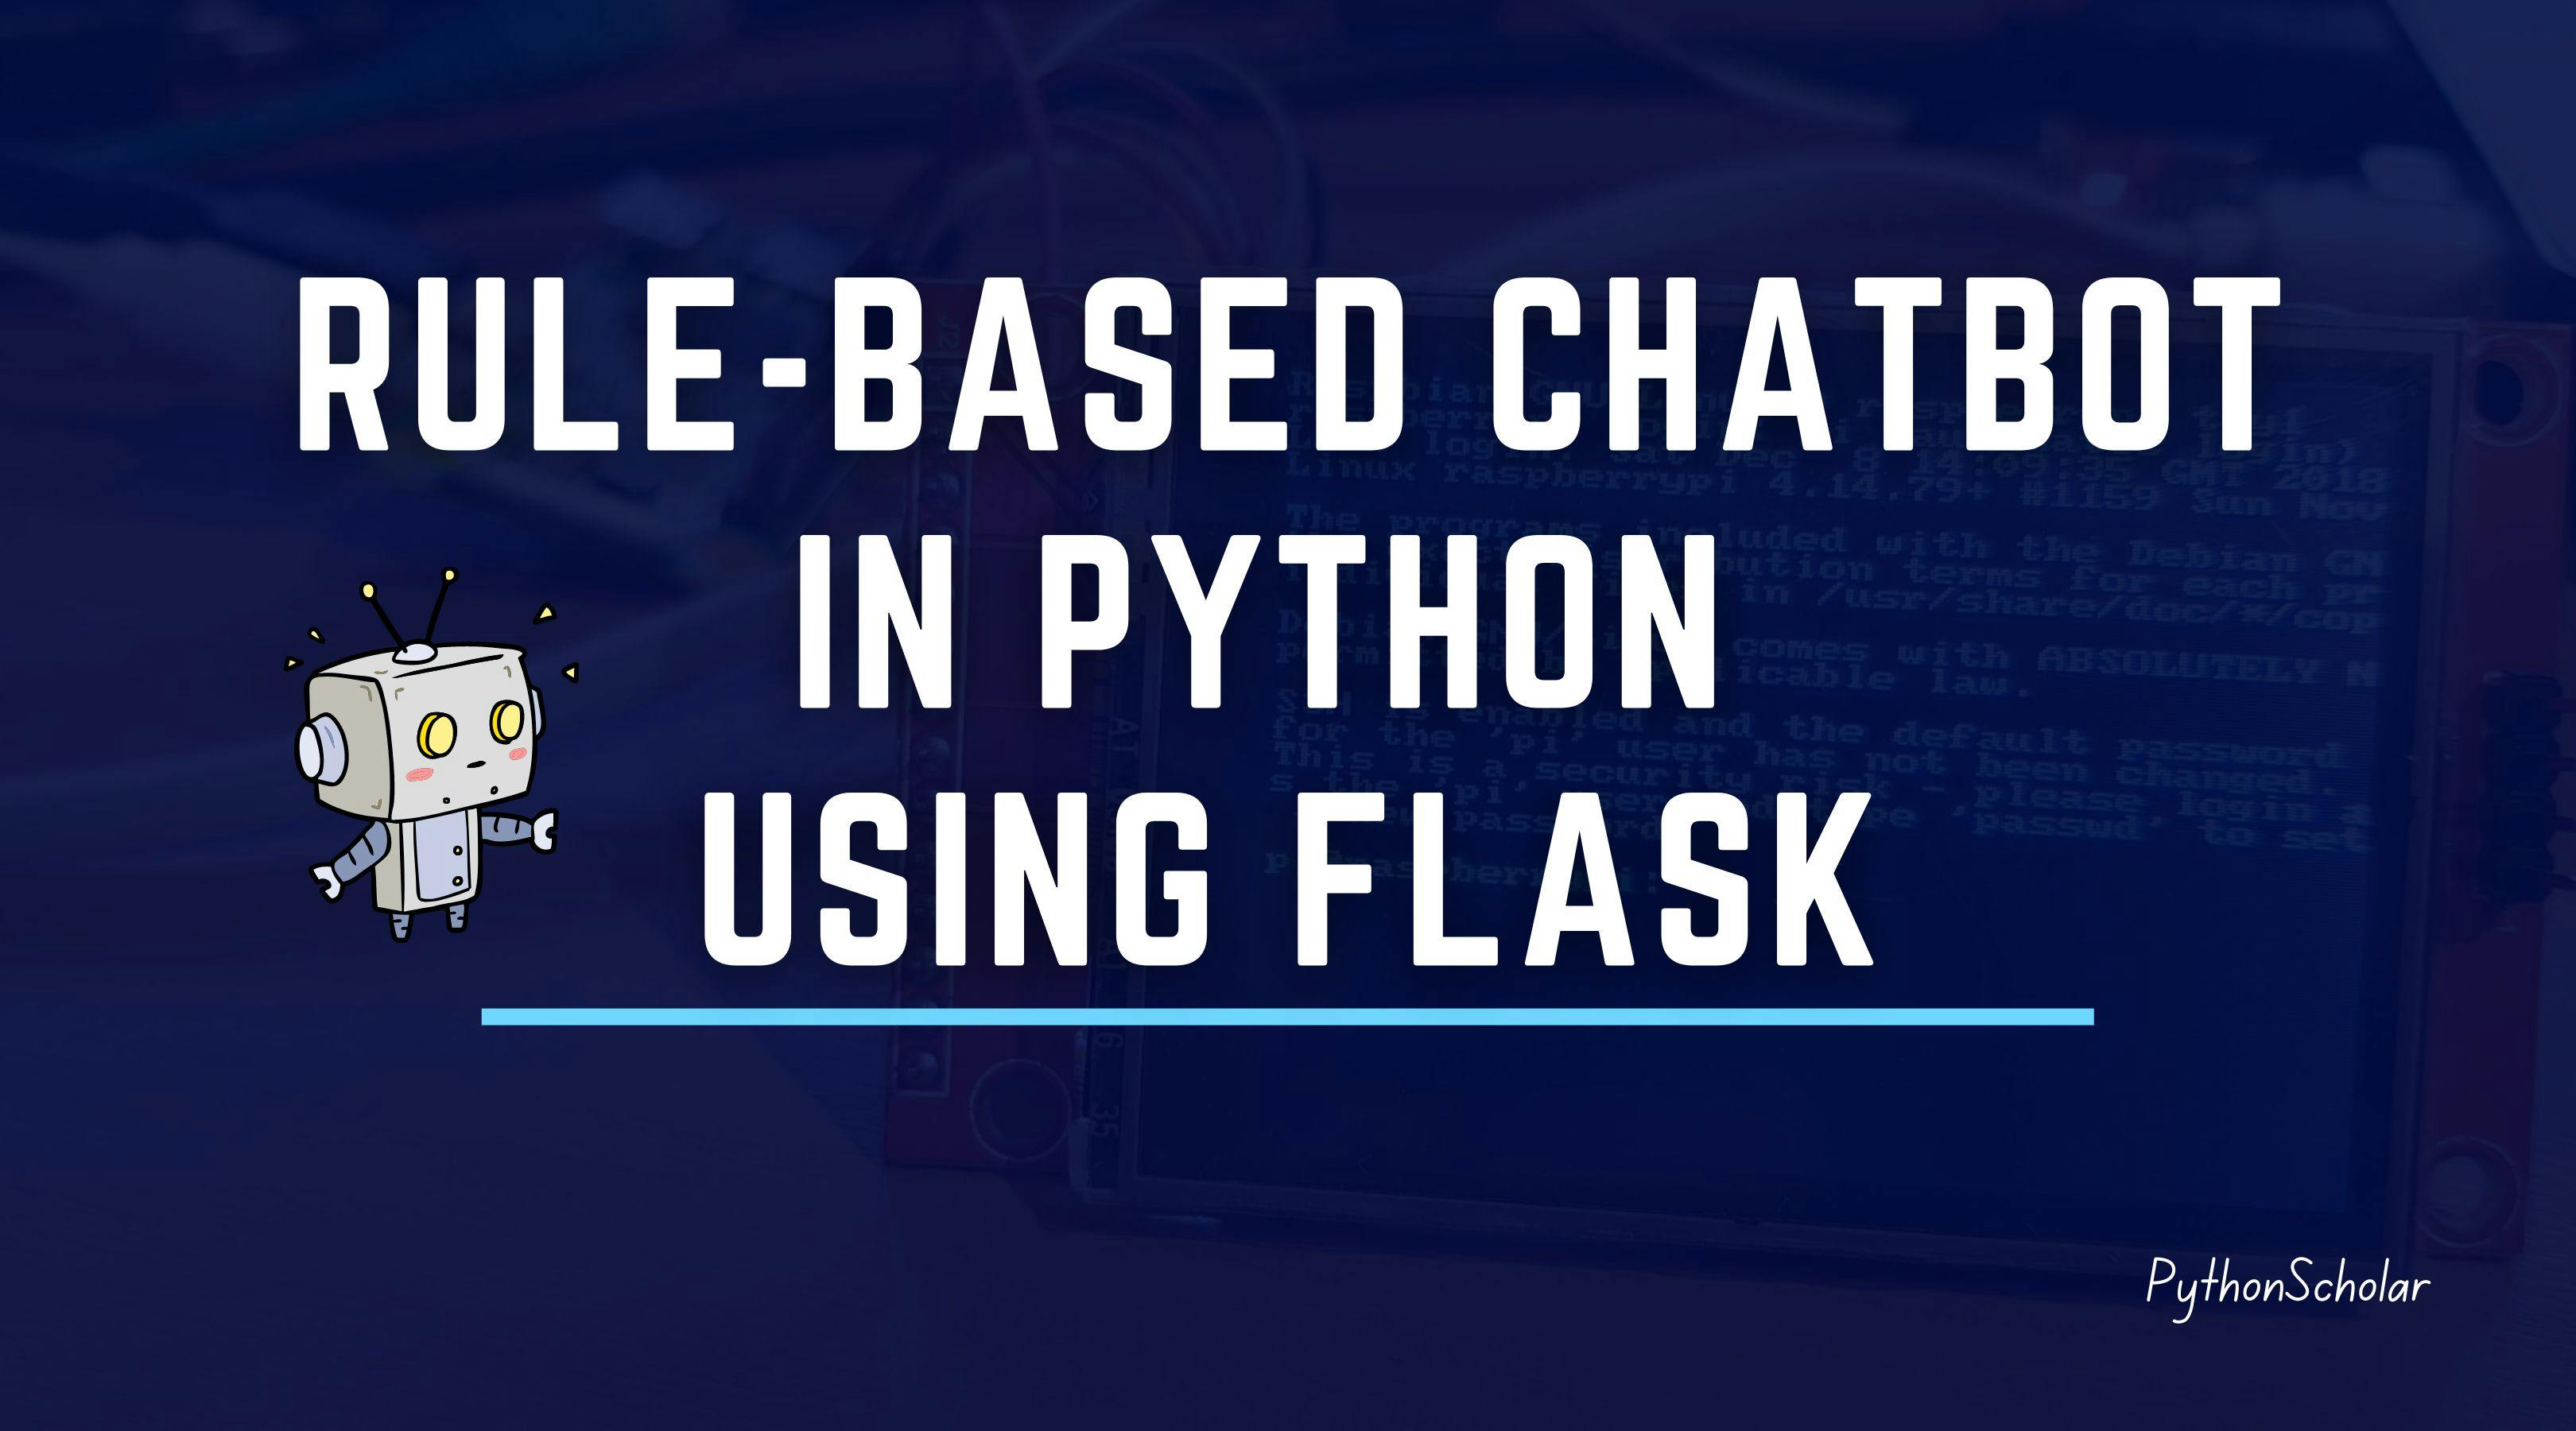 /using-flask-to-build-a-rule-based-chatbot-in-python feature image